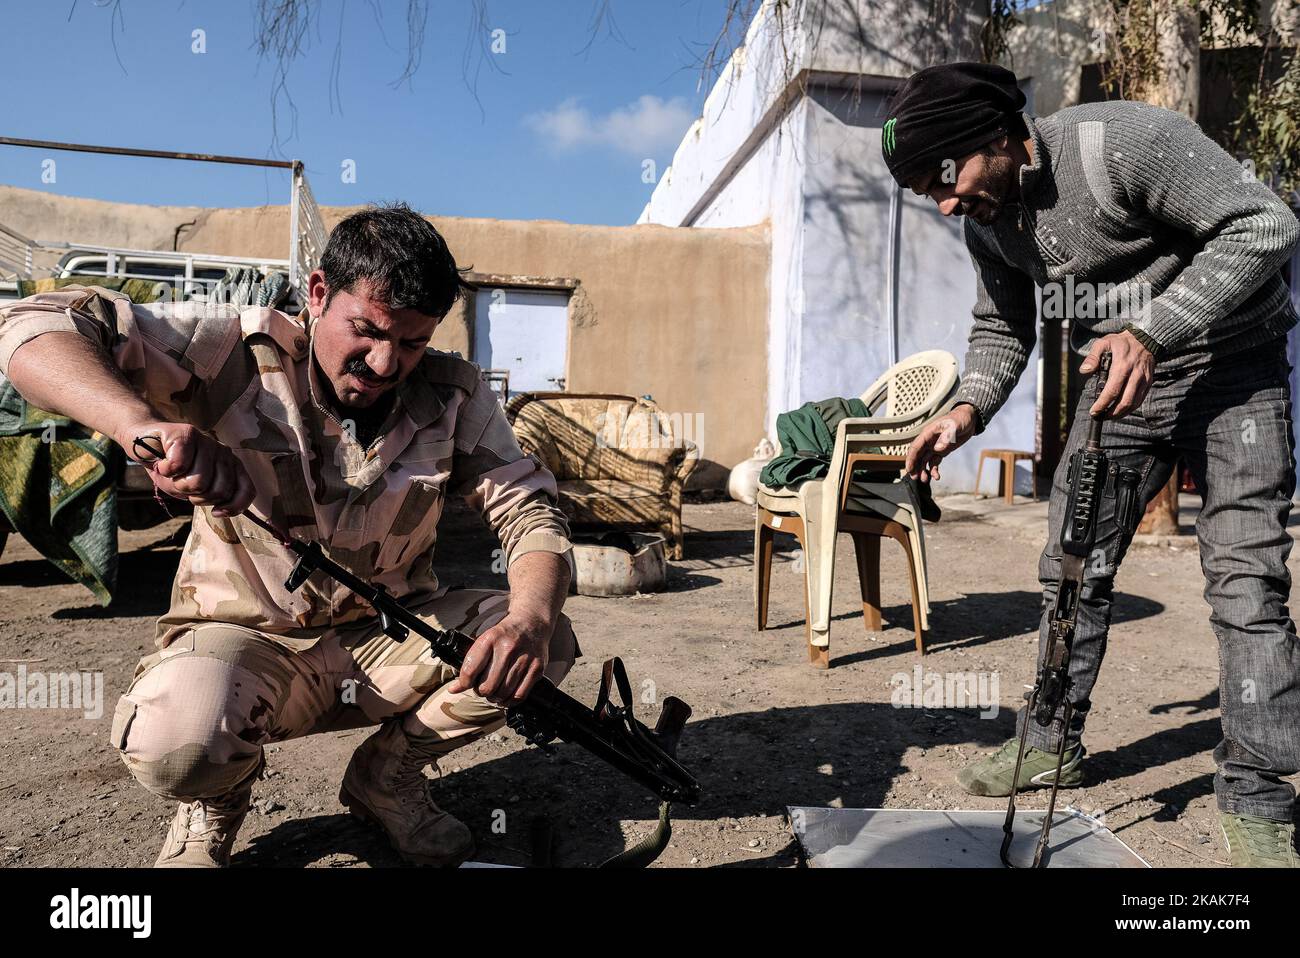 January 2017, Wardak, Iraq. Peshmerga soldiers cleaning their weapon. The KakaÂ’i Kurds are returning to their homes as Mosul offensive continiues. The KakaÂ’i Kurds are one of several multi-ethnic groups who are part of the Yarsan or Ahl el-Haqq (people of truth), a religion founded by Sultan Sahak in the late 14th century in western Iran. Some Yarsanis in Iraq are called the KakaÂ’is. The Kakais are one of the religious minorities scattered throughout northern Iraq in the provinces of Sulaimaniyah and Halabja, in the Ninevah Plains of Ninevah province and in villages to the southeast of Kirk Stock Photo